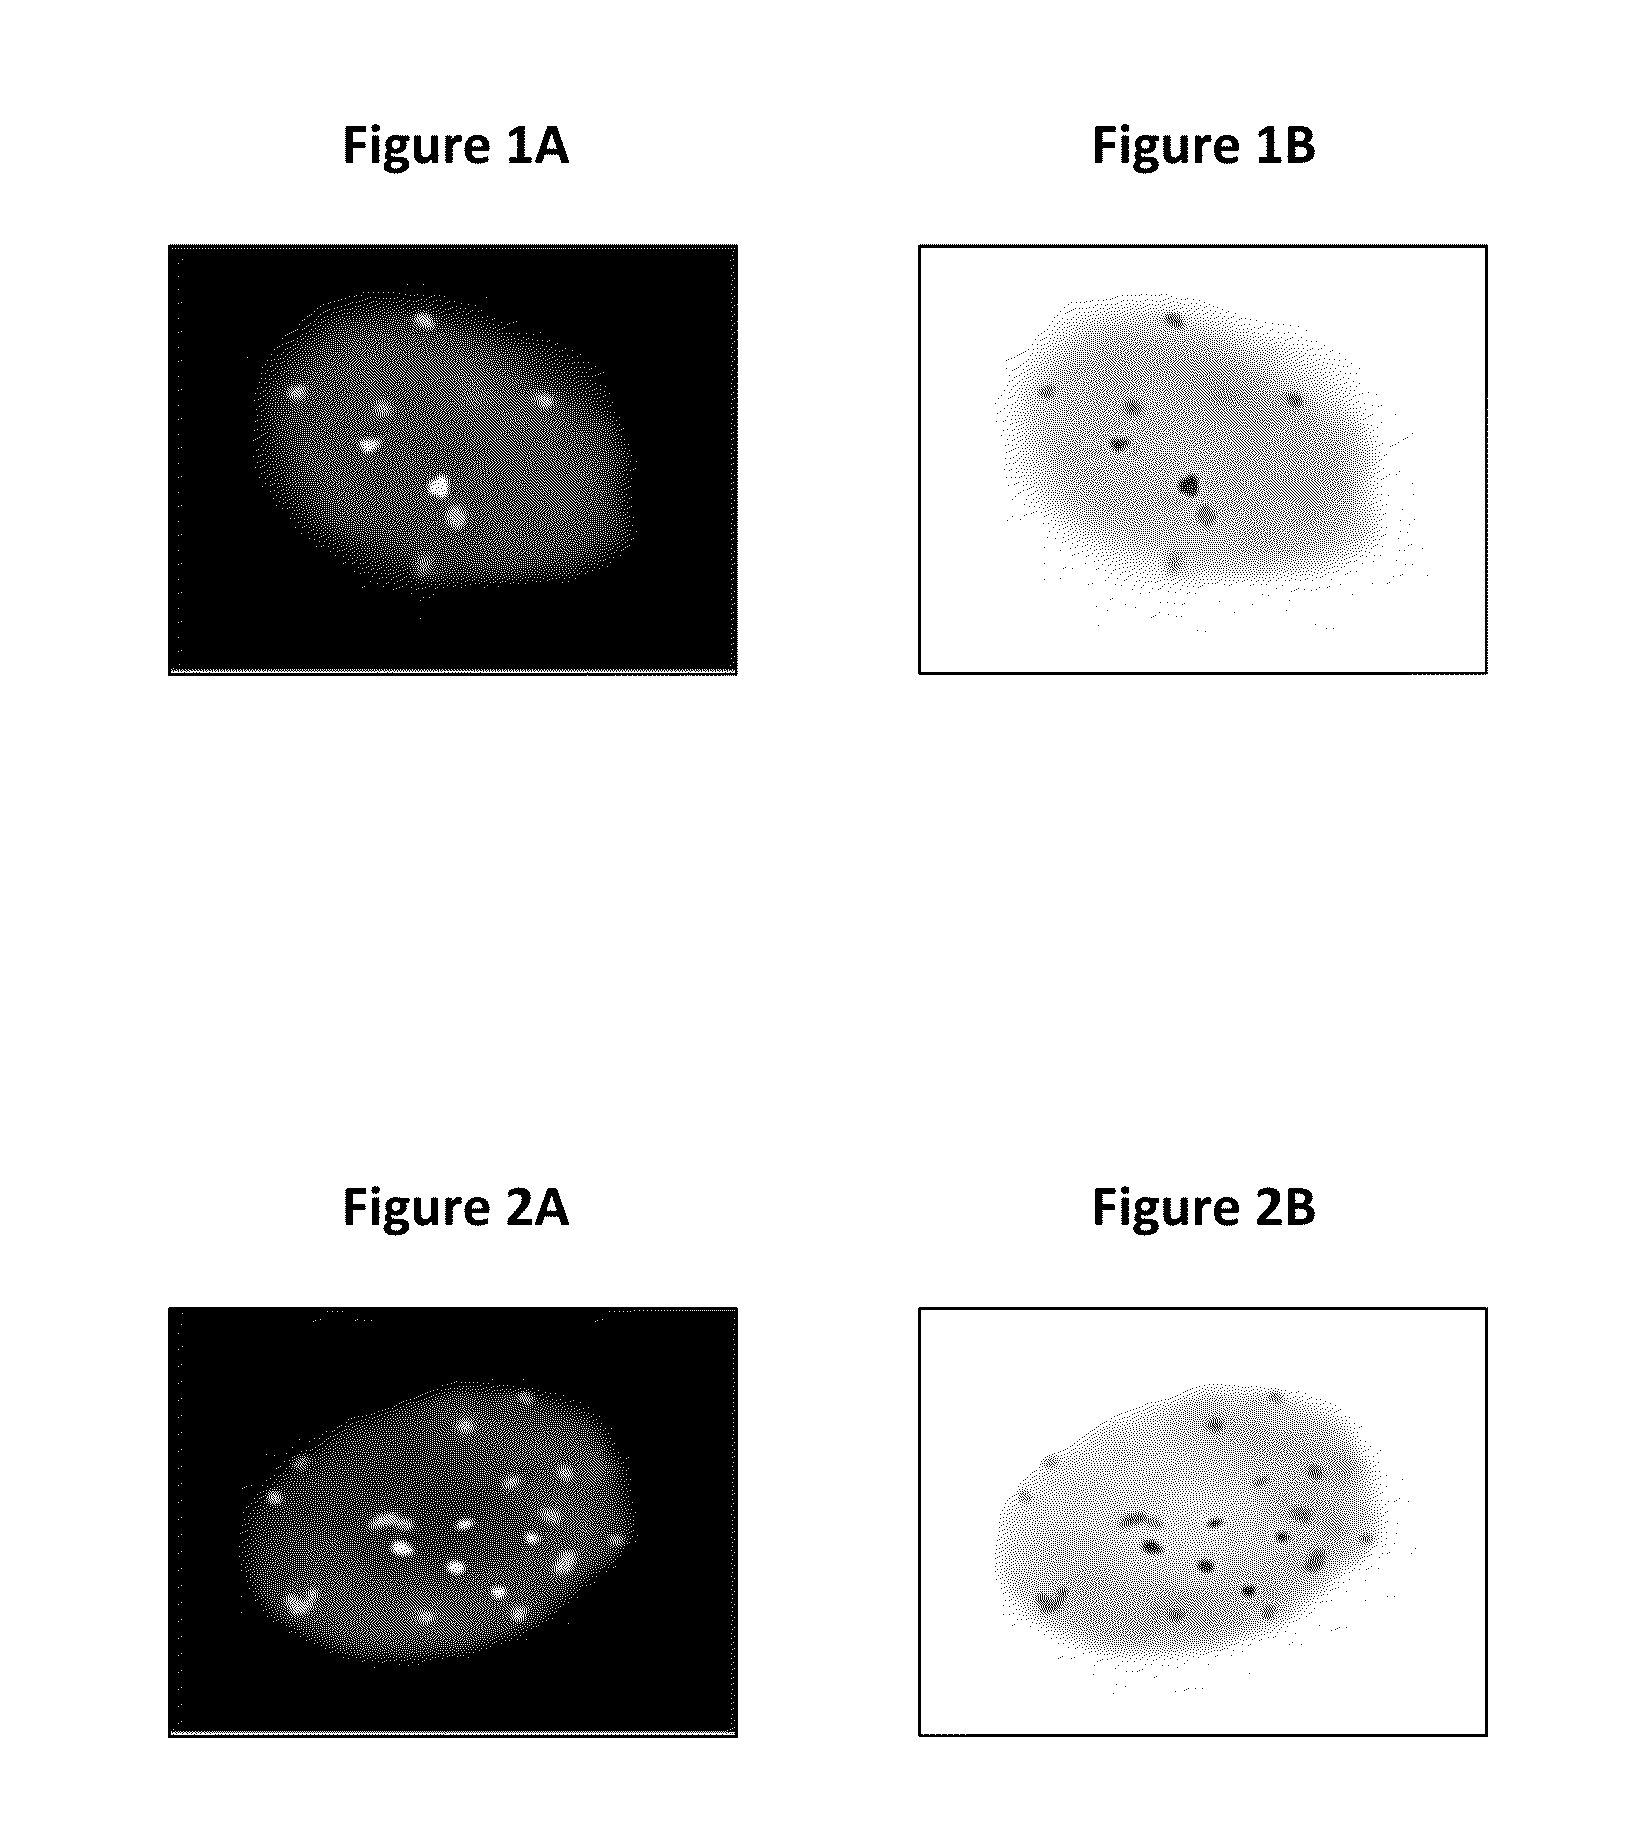 System and method for detecting abnormalities in cervical cells